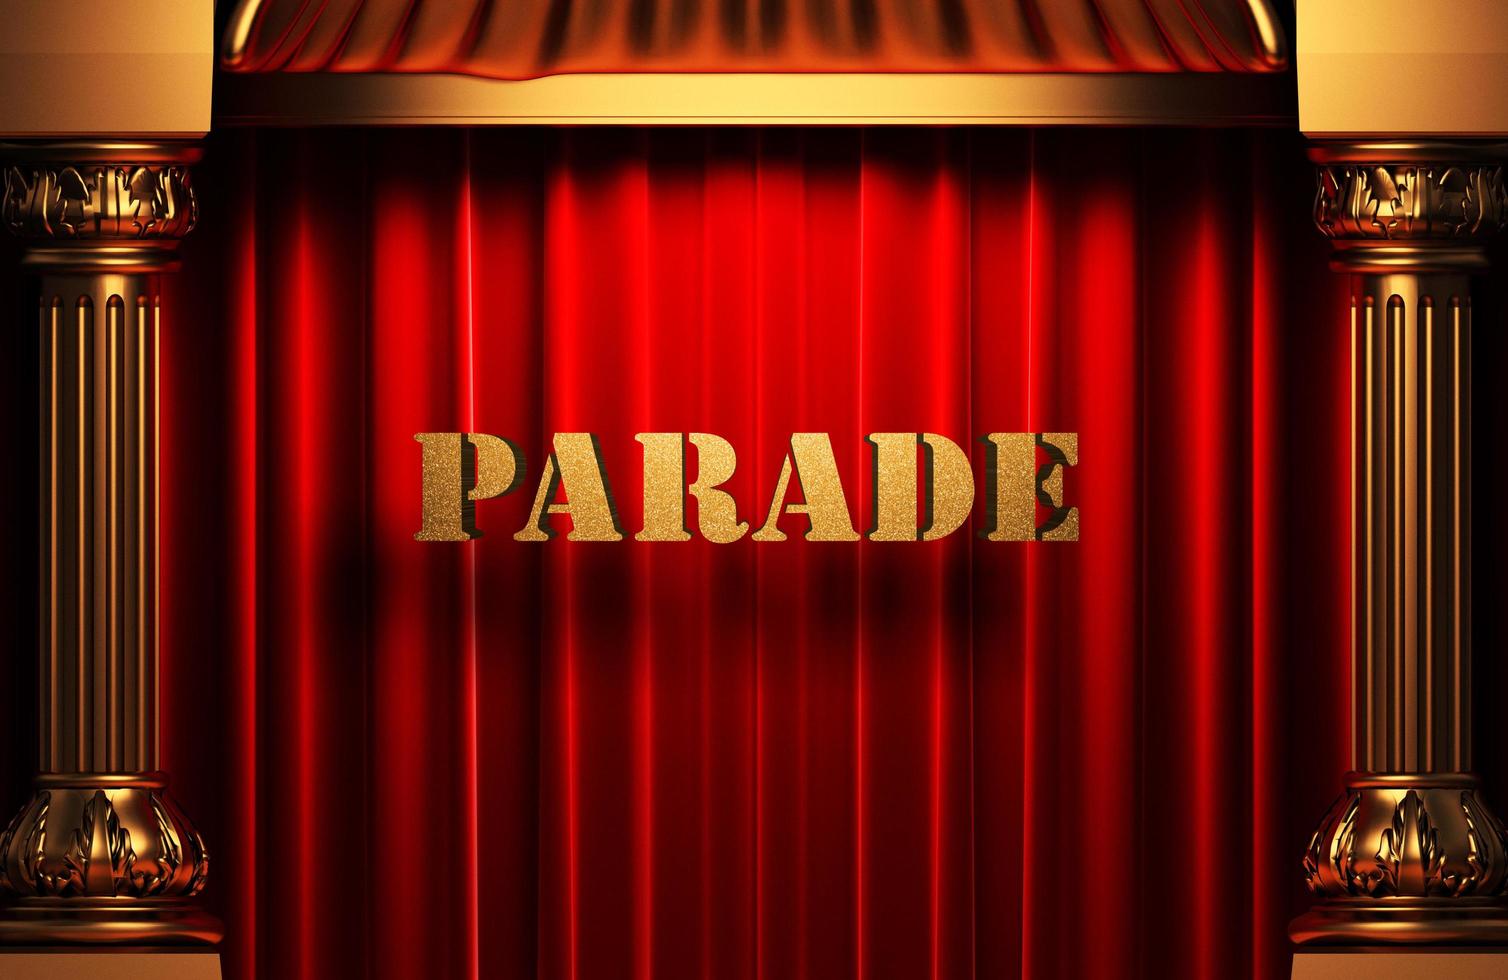 parade golden word on red curtain photo